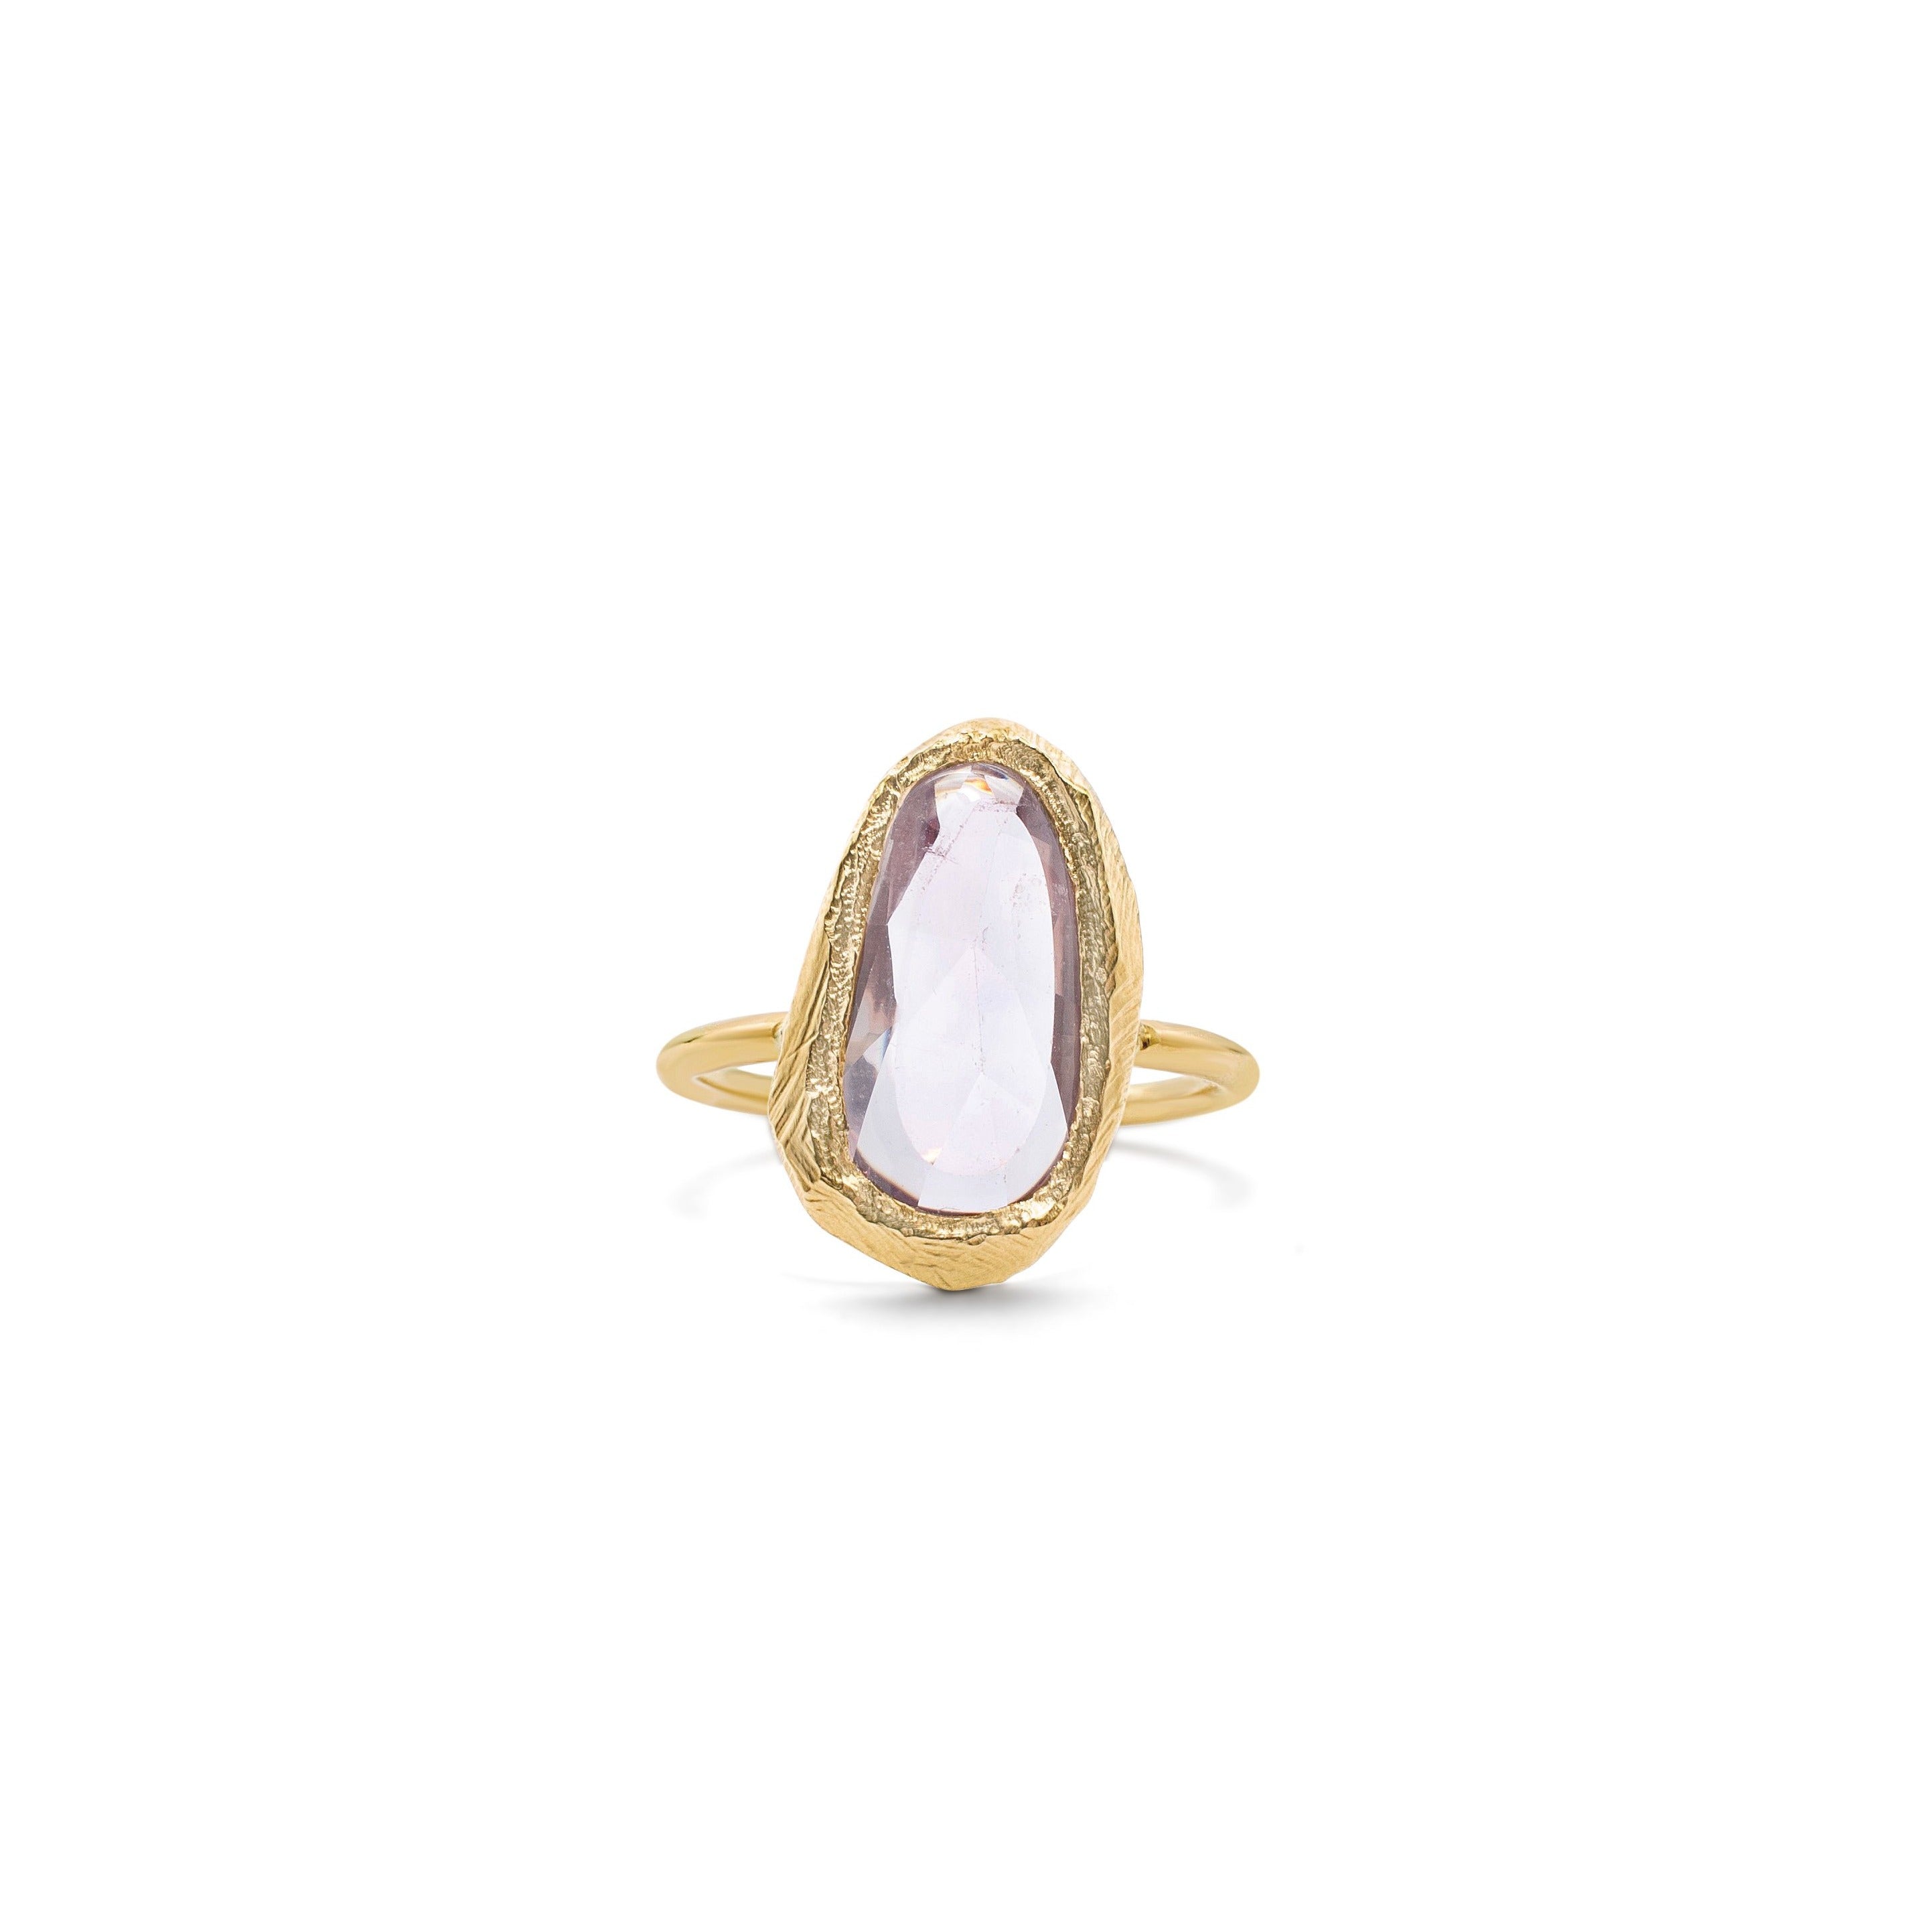 Handmade ring made in 18kt gold with a lavender sapphire